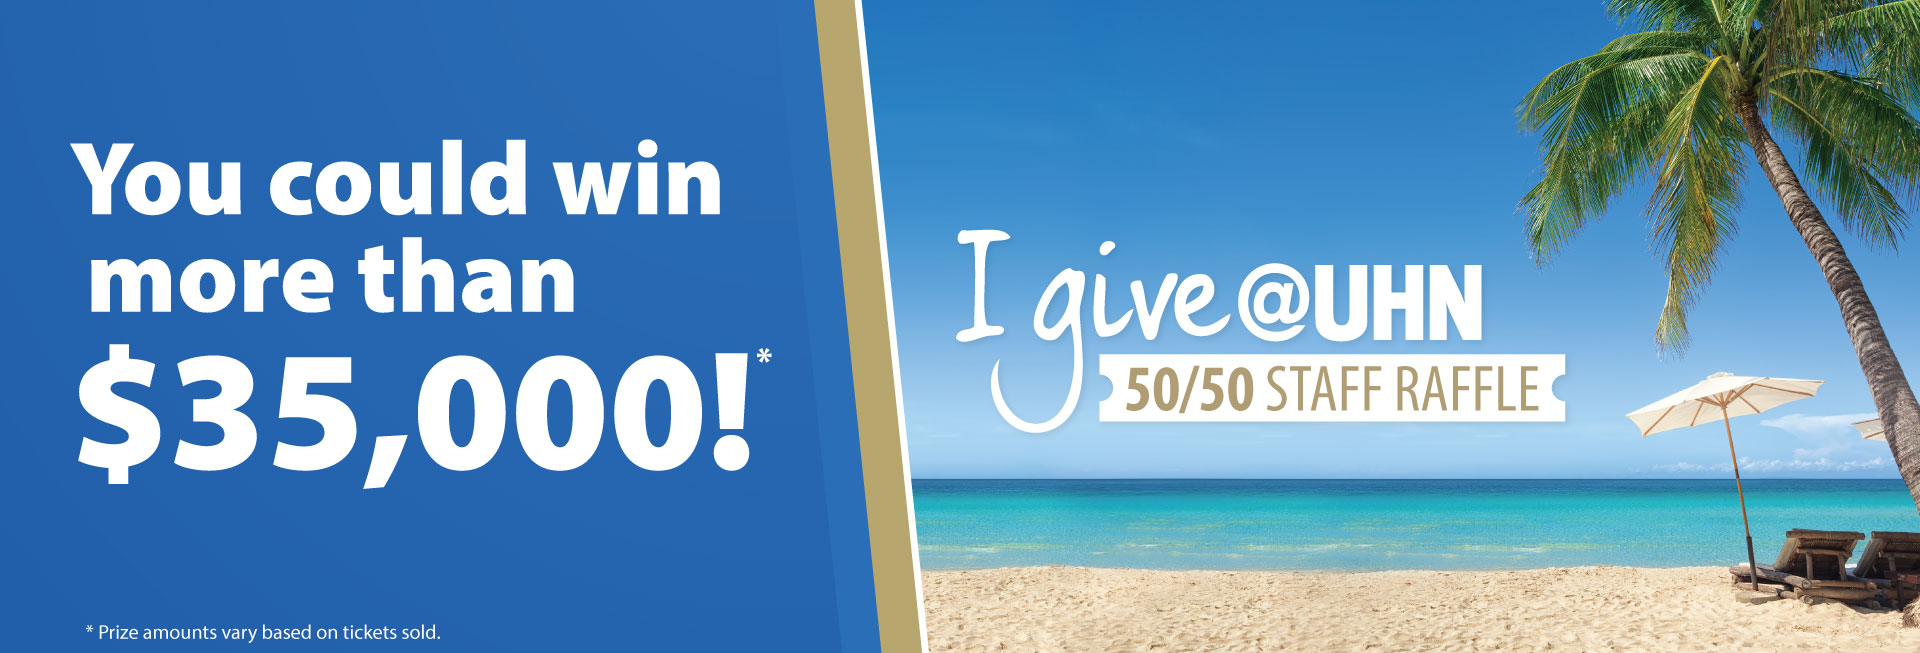 I give@UHN 50/50 staff raffle. You could win more than $35,000!